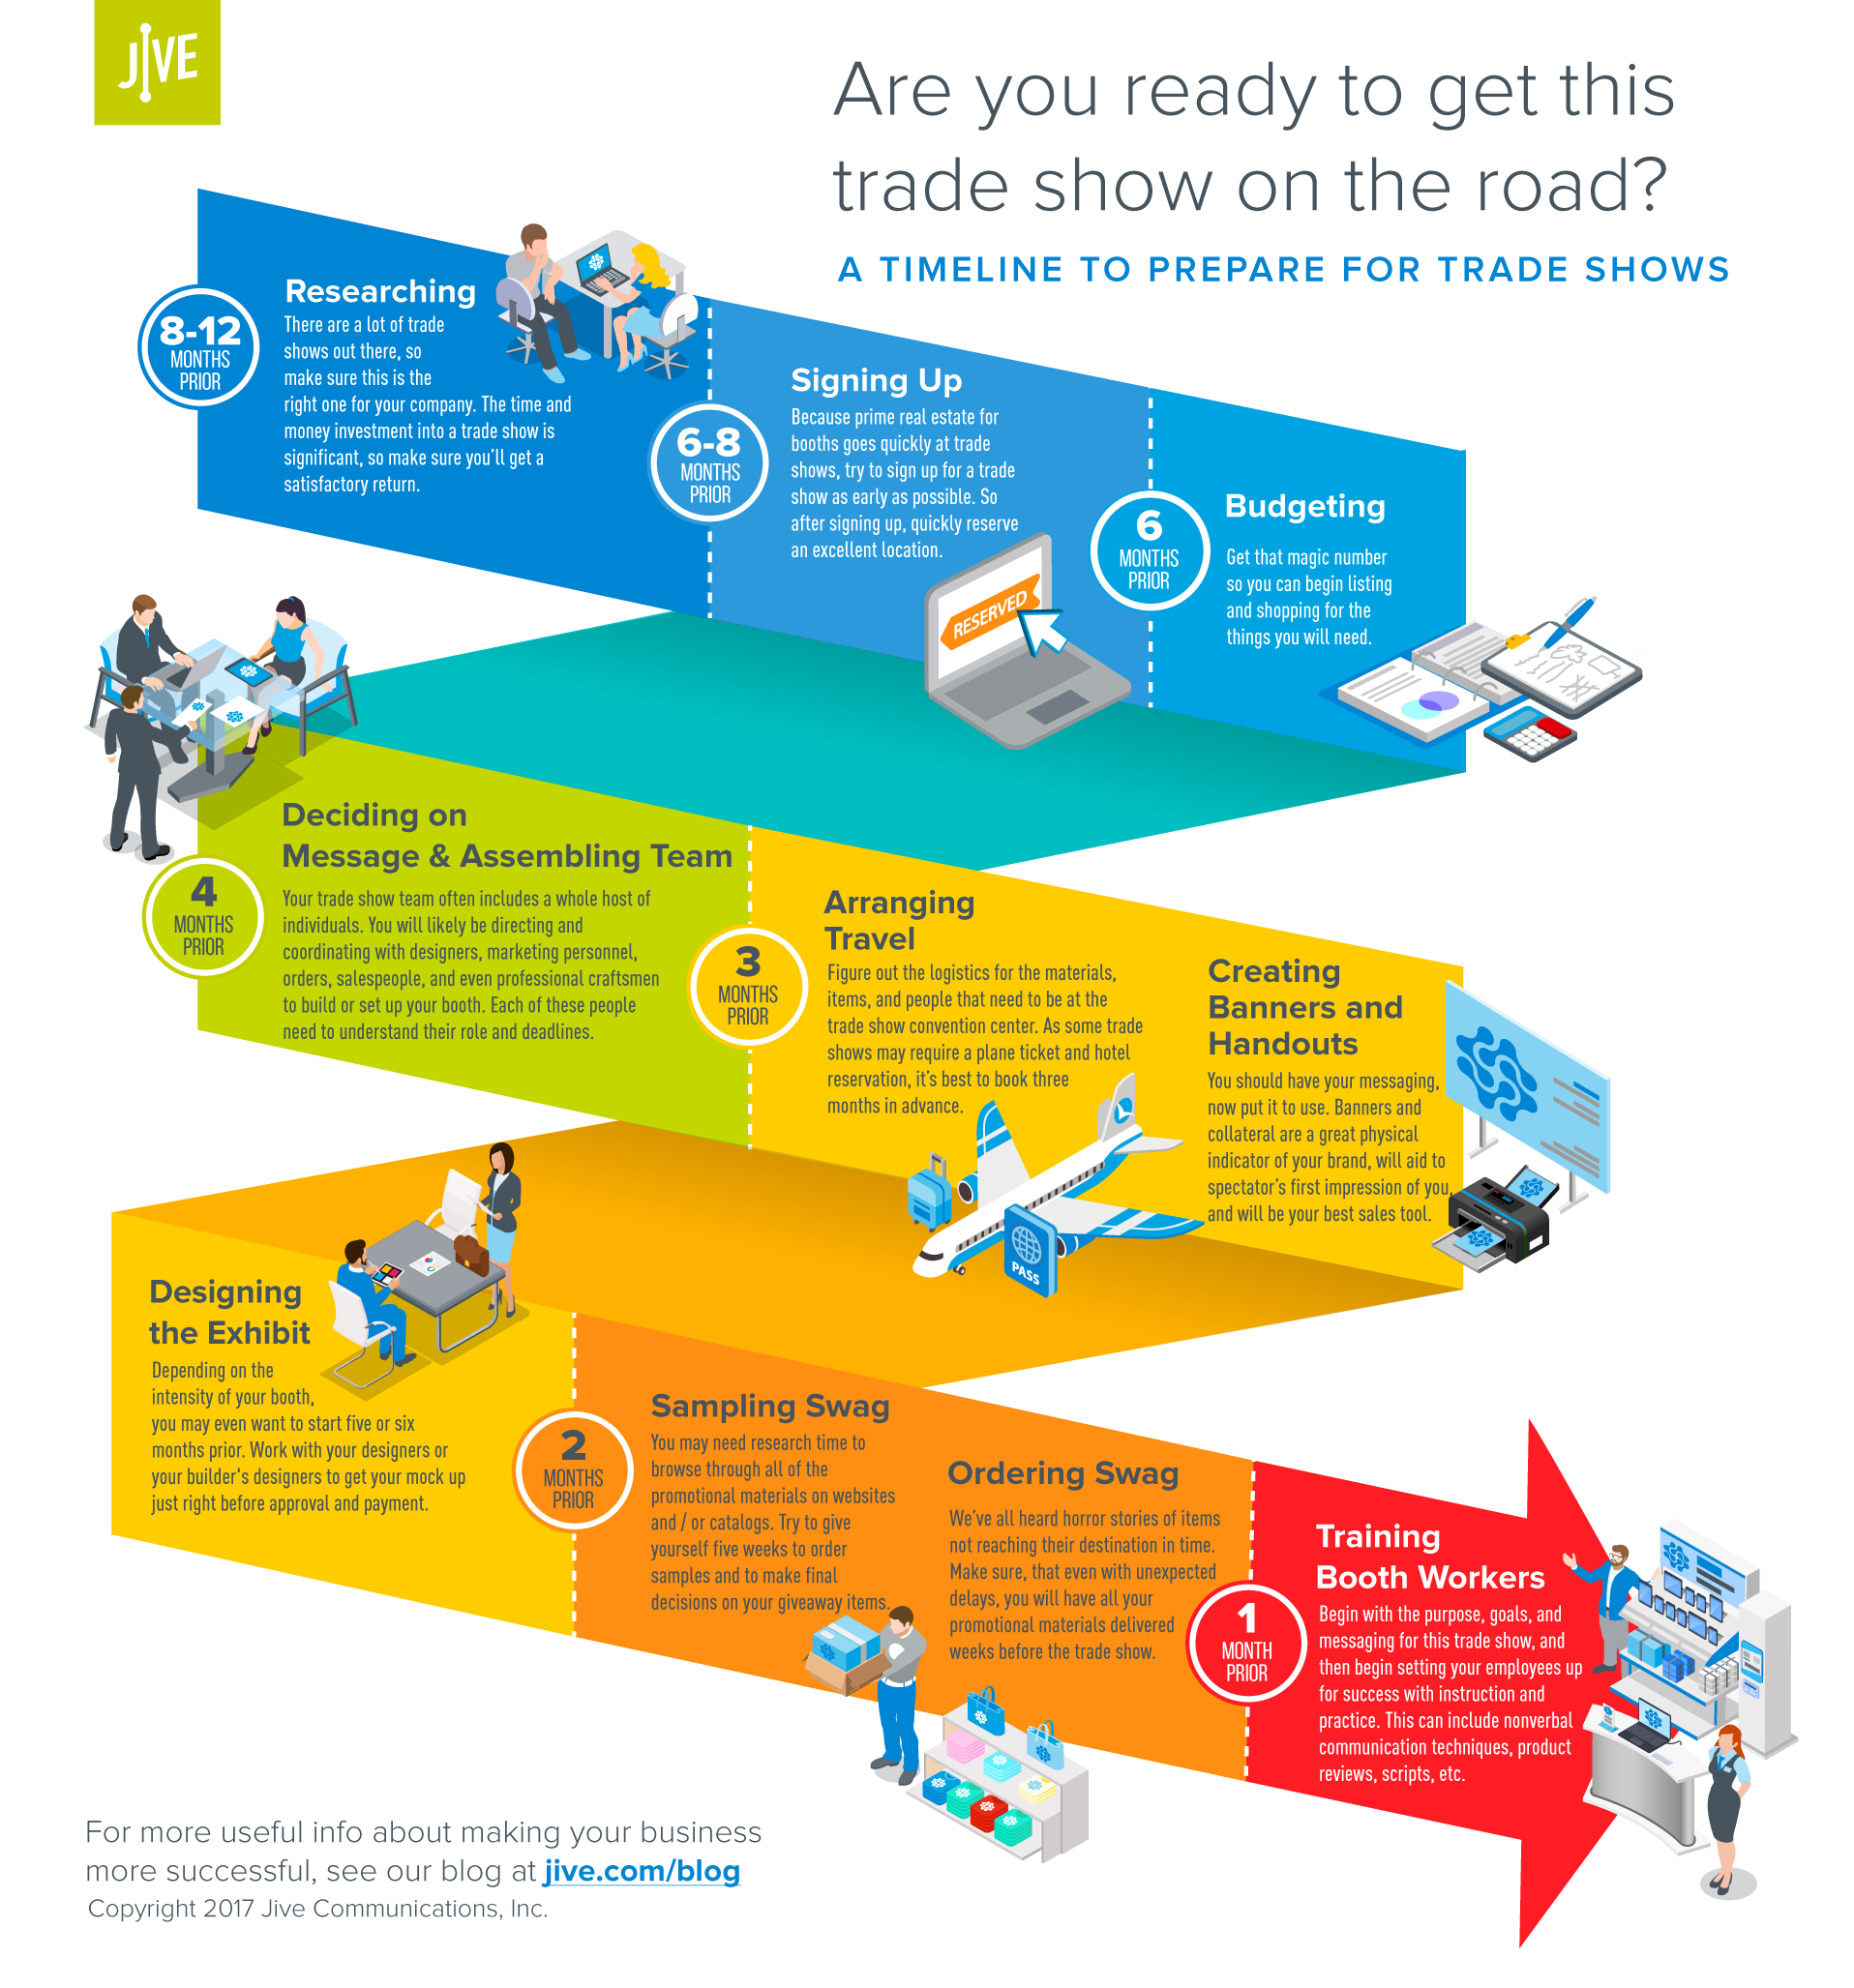 Are you ready to get this trade show on the road?